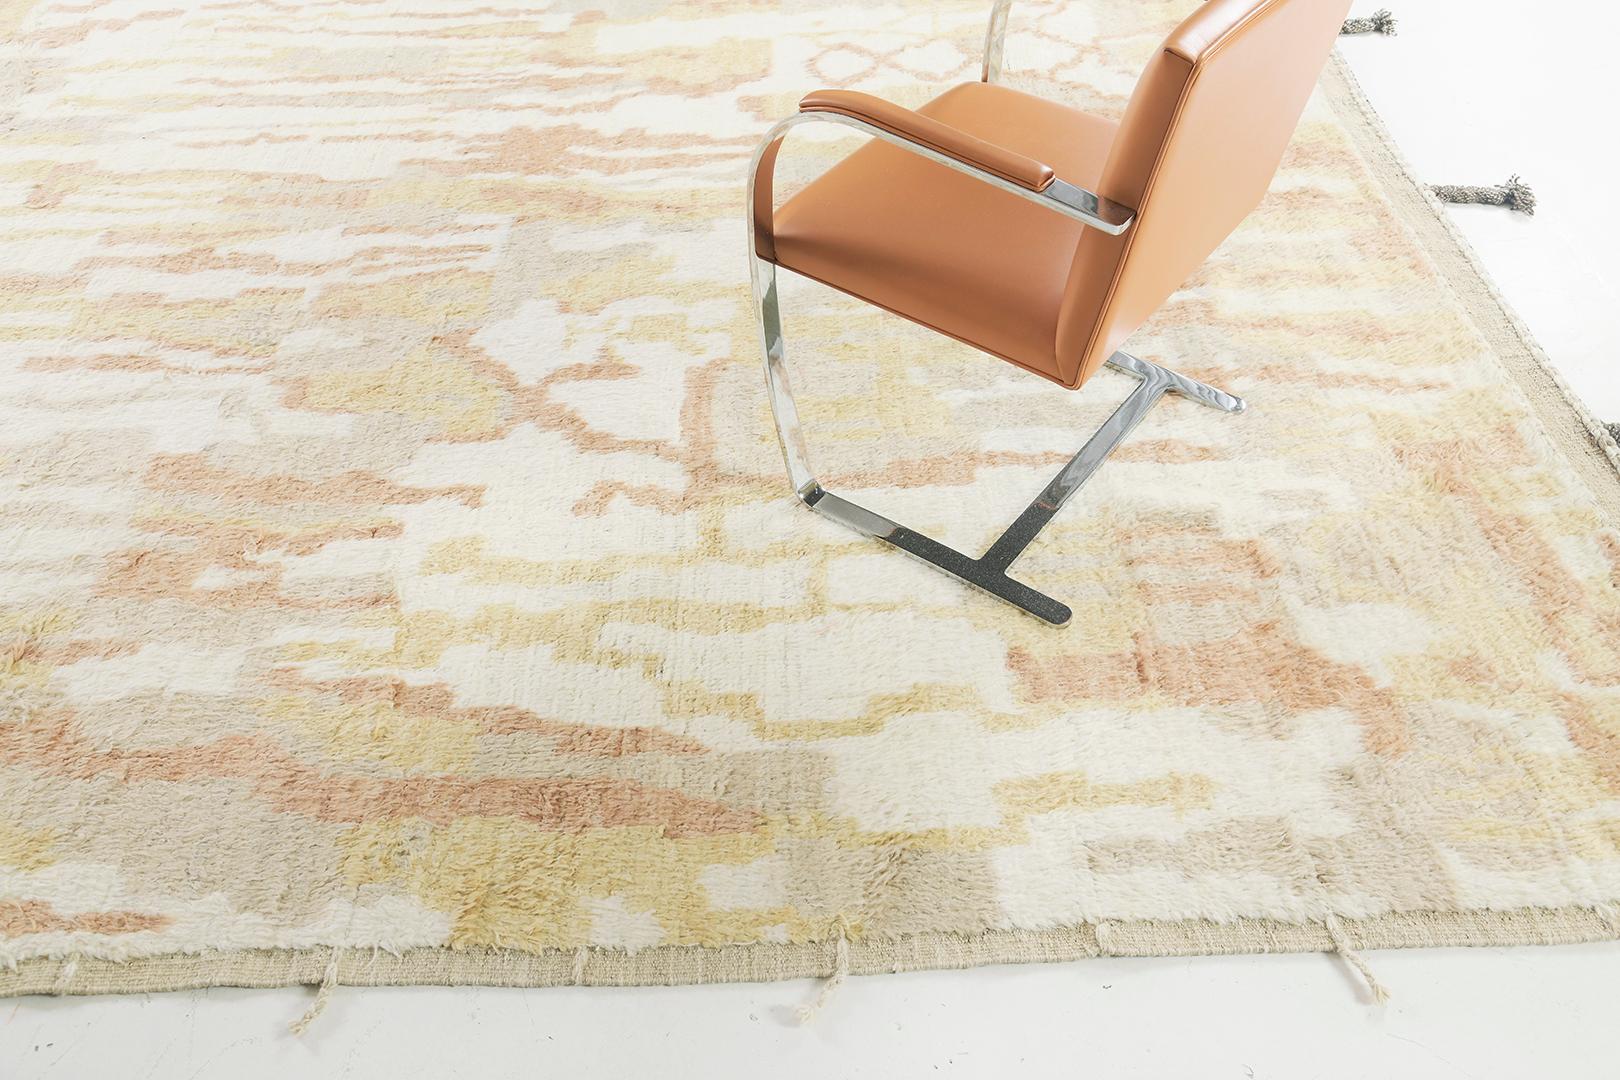 Tadla’ illustrates brilliance of Moroccan symbolisms through its captivating components. Displaying ambiguous ancient Berber motifs, this sophisticated rug is in the most soothing earthy tones of cedar and khaki. Mehraban's Atlas collection is noted